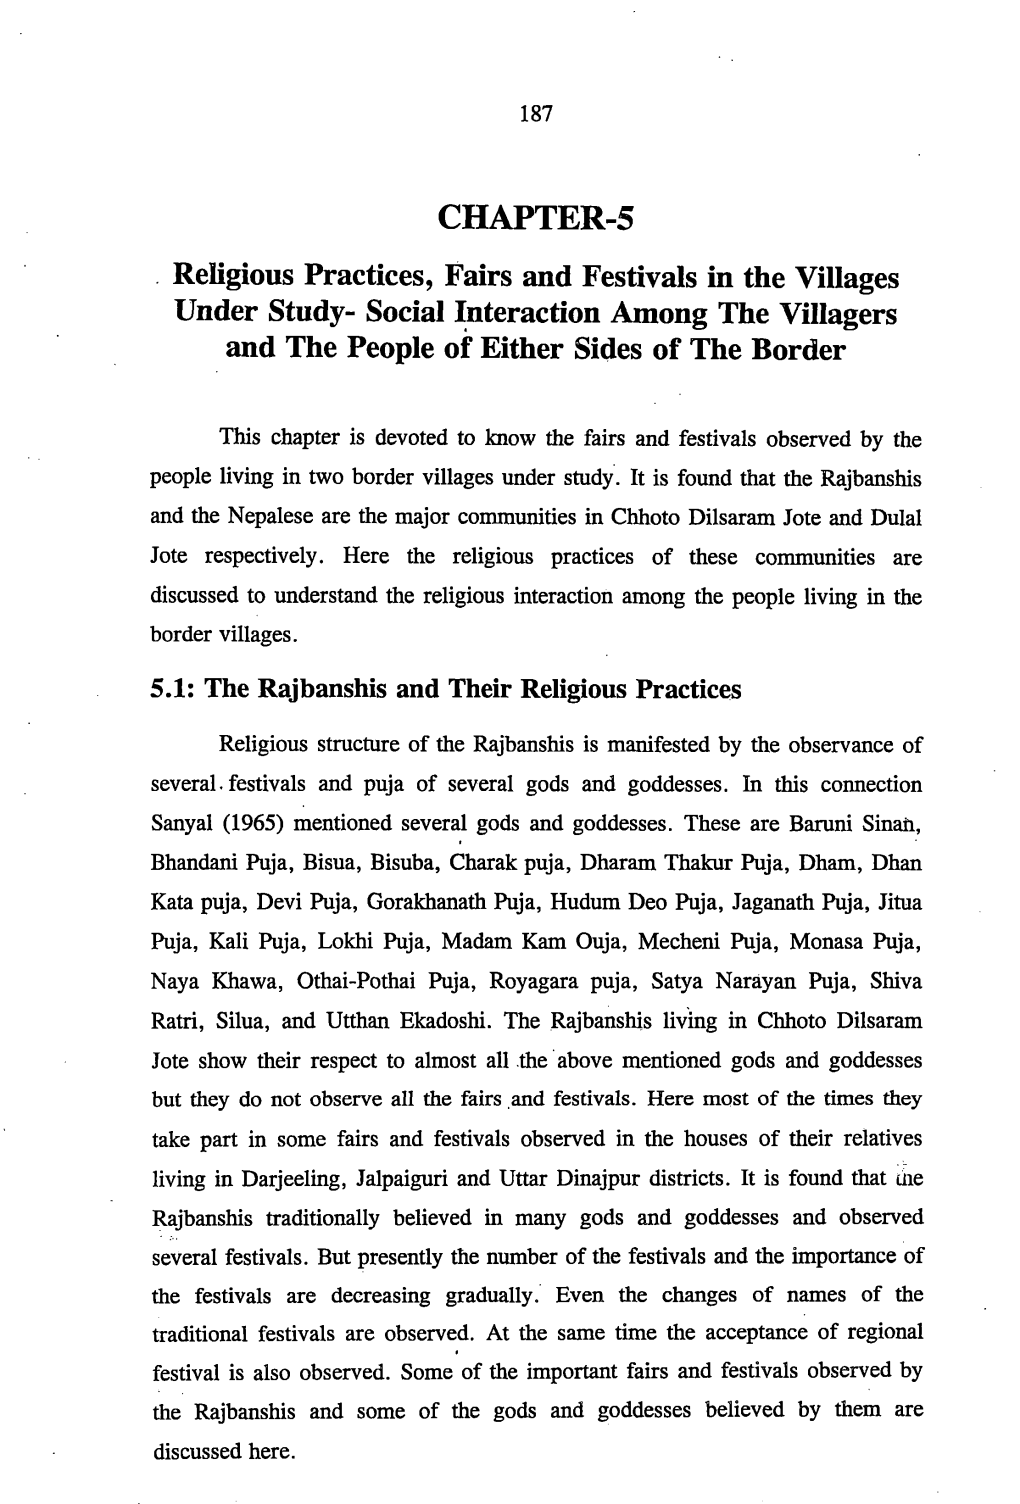 CHAPTER-S Religious Practices, Fairs and Festivals in the Villages Under Study- Social ~Nteraction Among the Villagers and the People of Either Sides of the Border